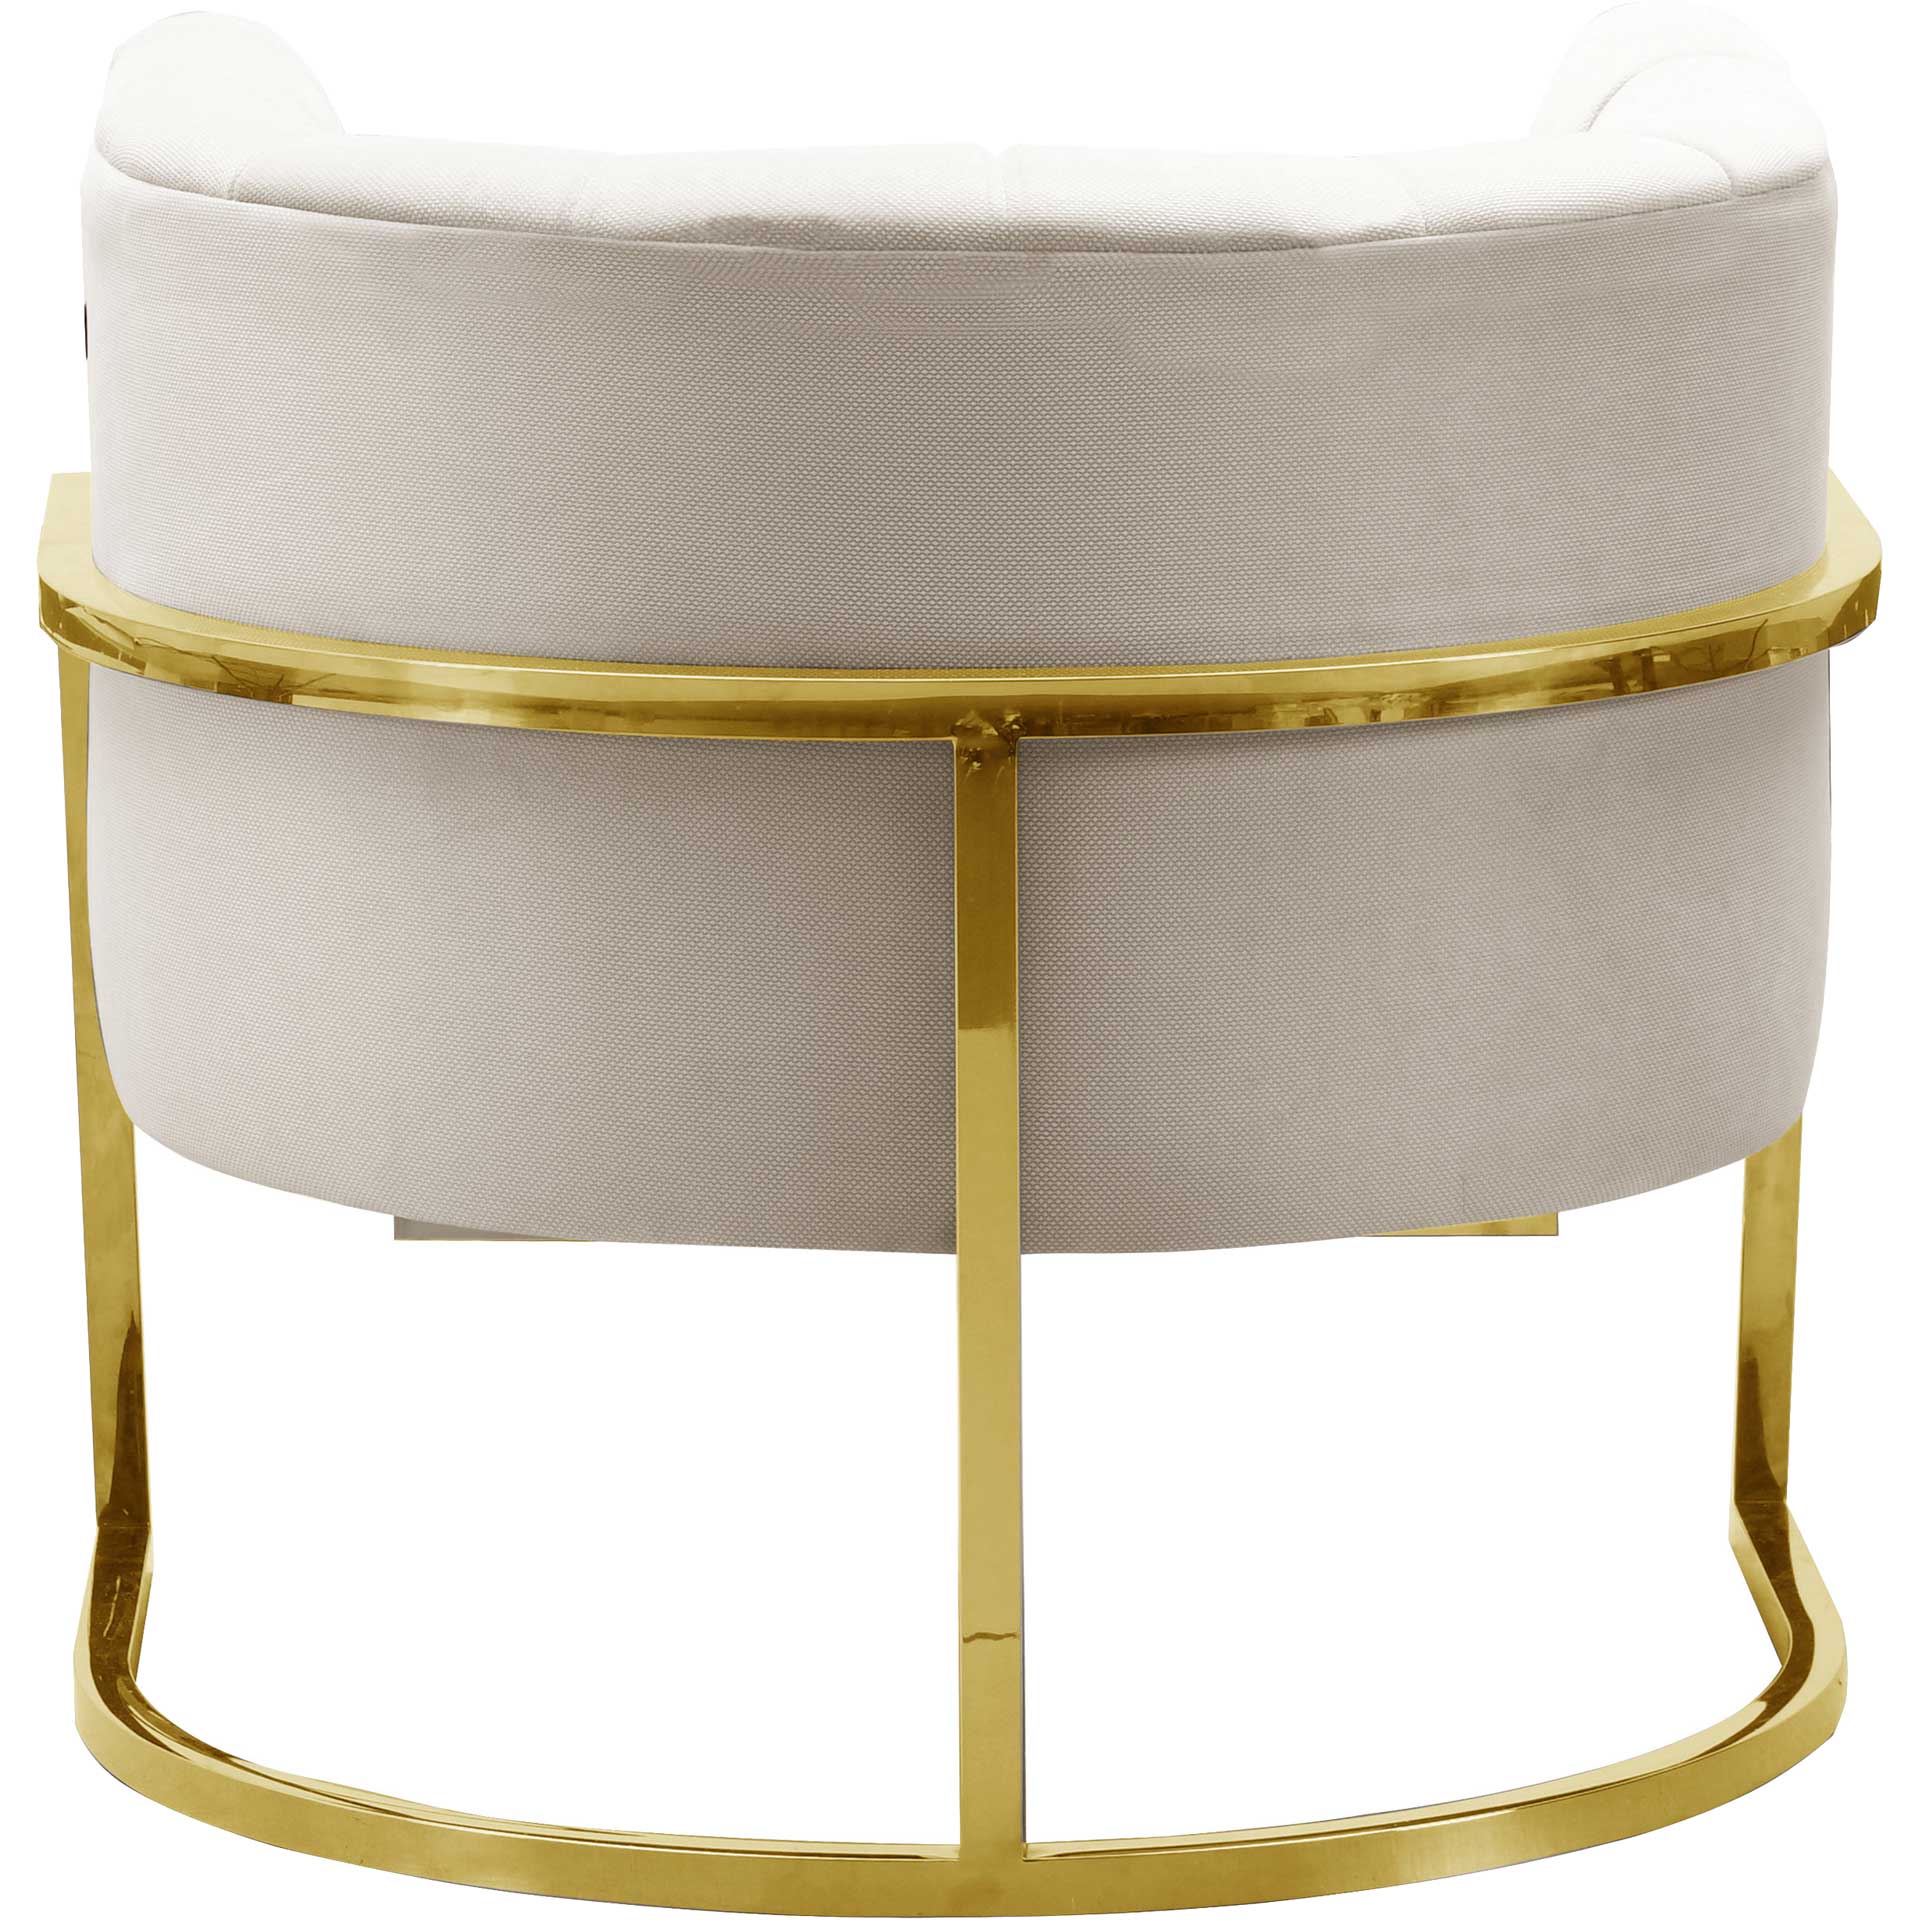 Maddison Spotted Chair Cream/Gold